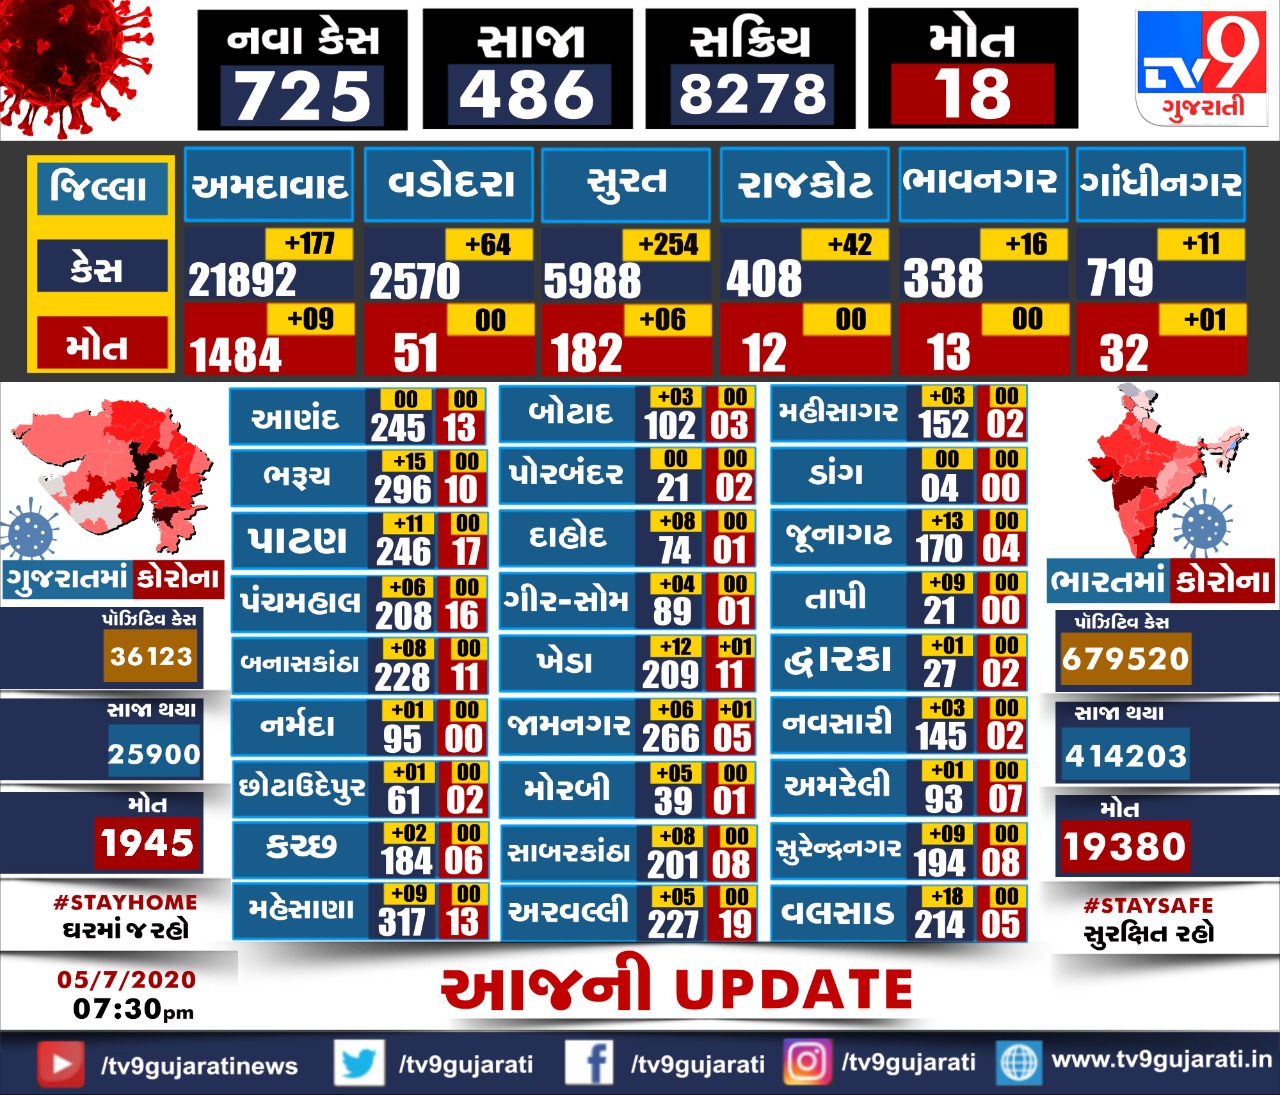 725 new cases of COVID19 detected in 24 hours in Gujarat 18 died when Surat recorded highest 254 cases today